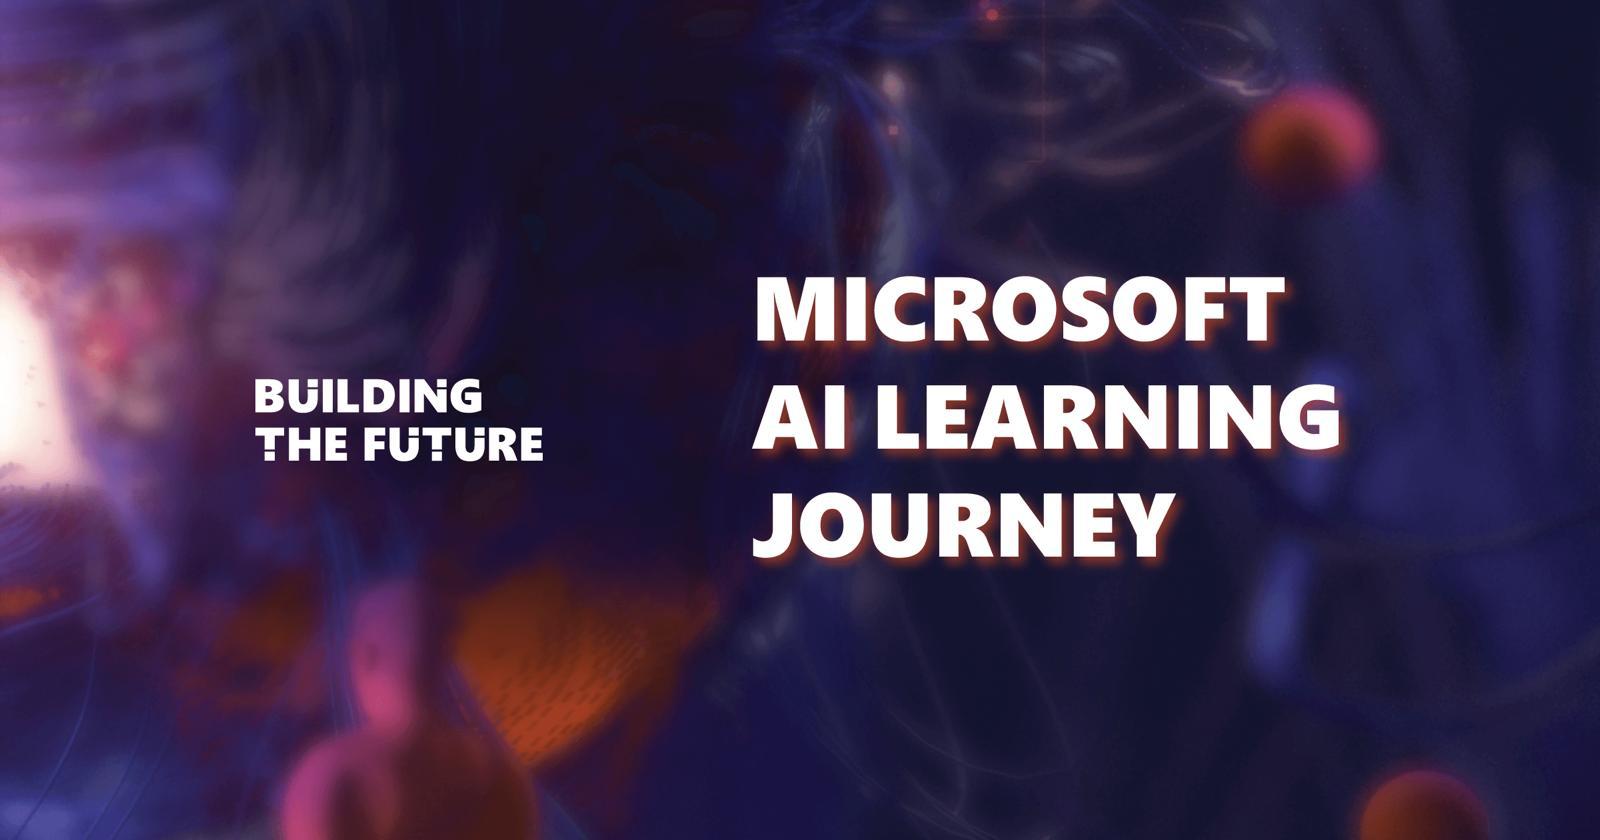 Cover image for Microsoft AI Learning Journey as part of the Building the Future event